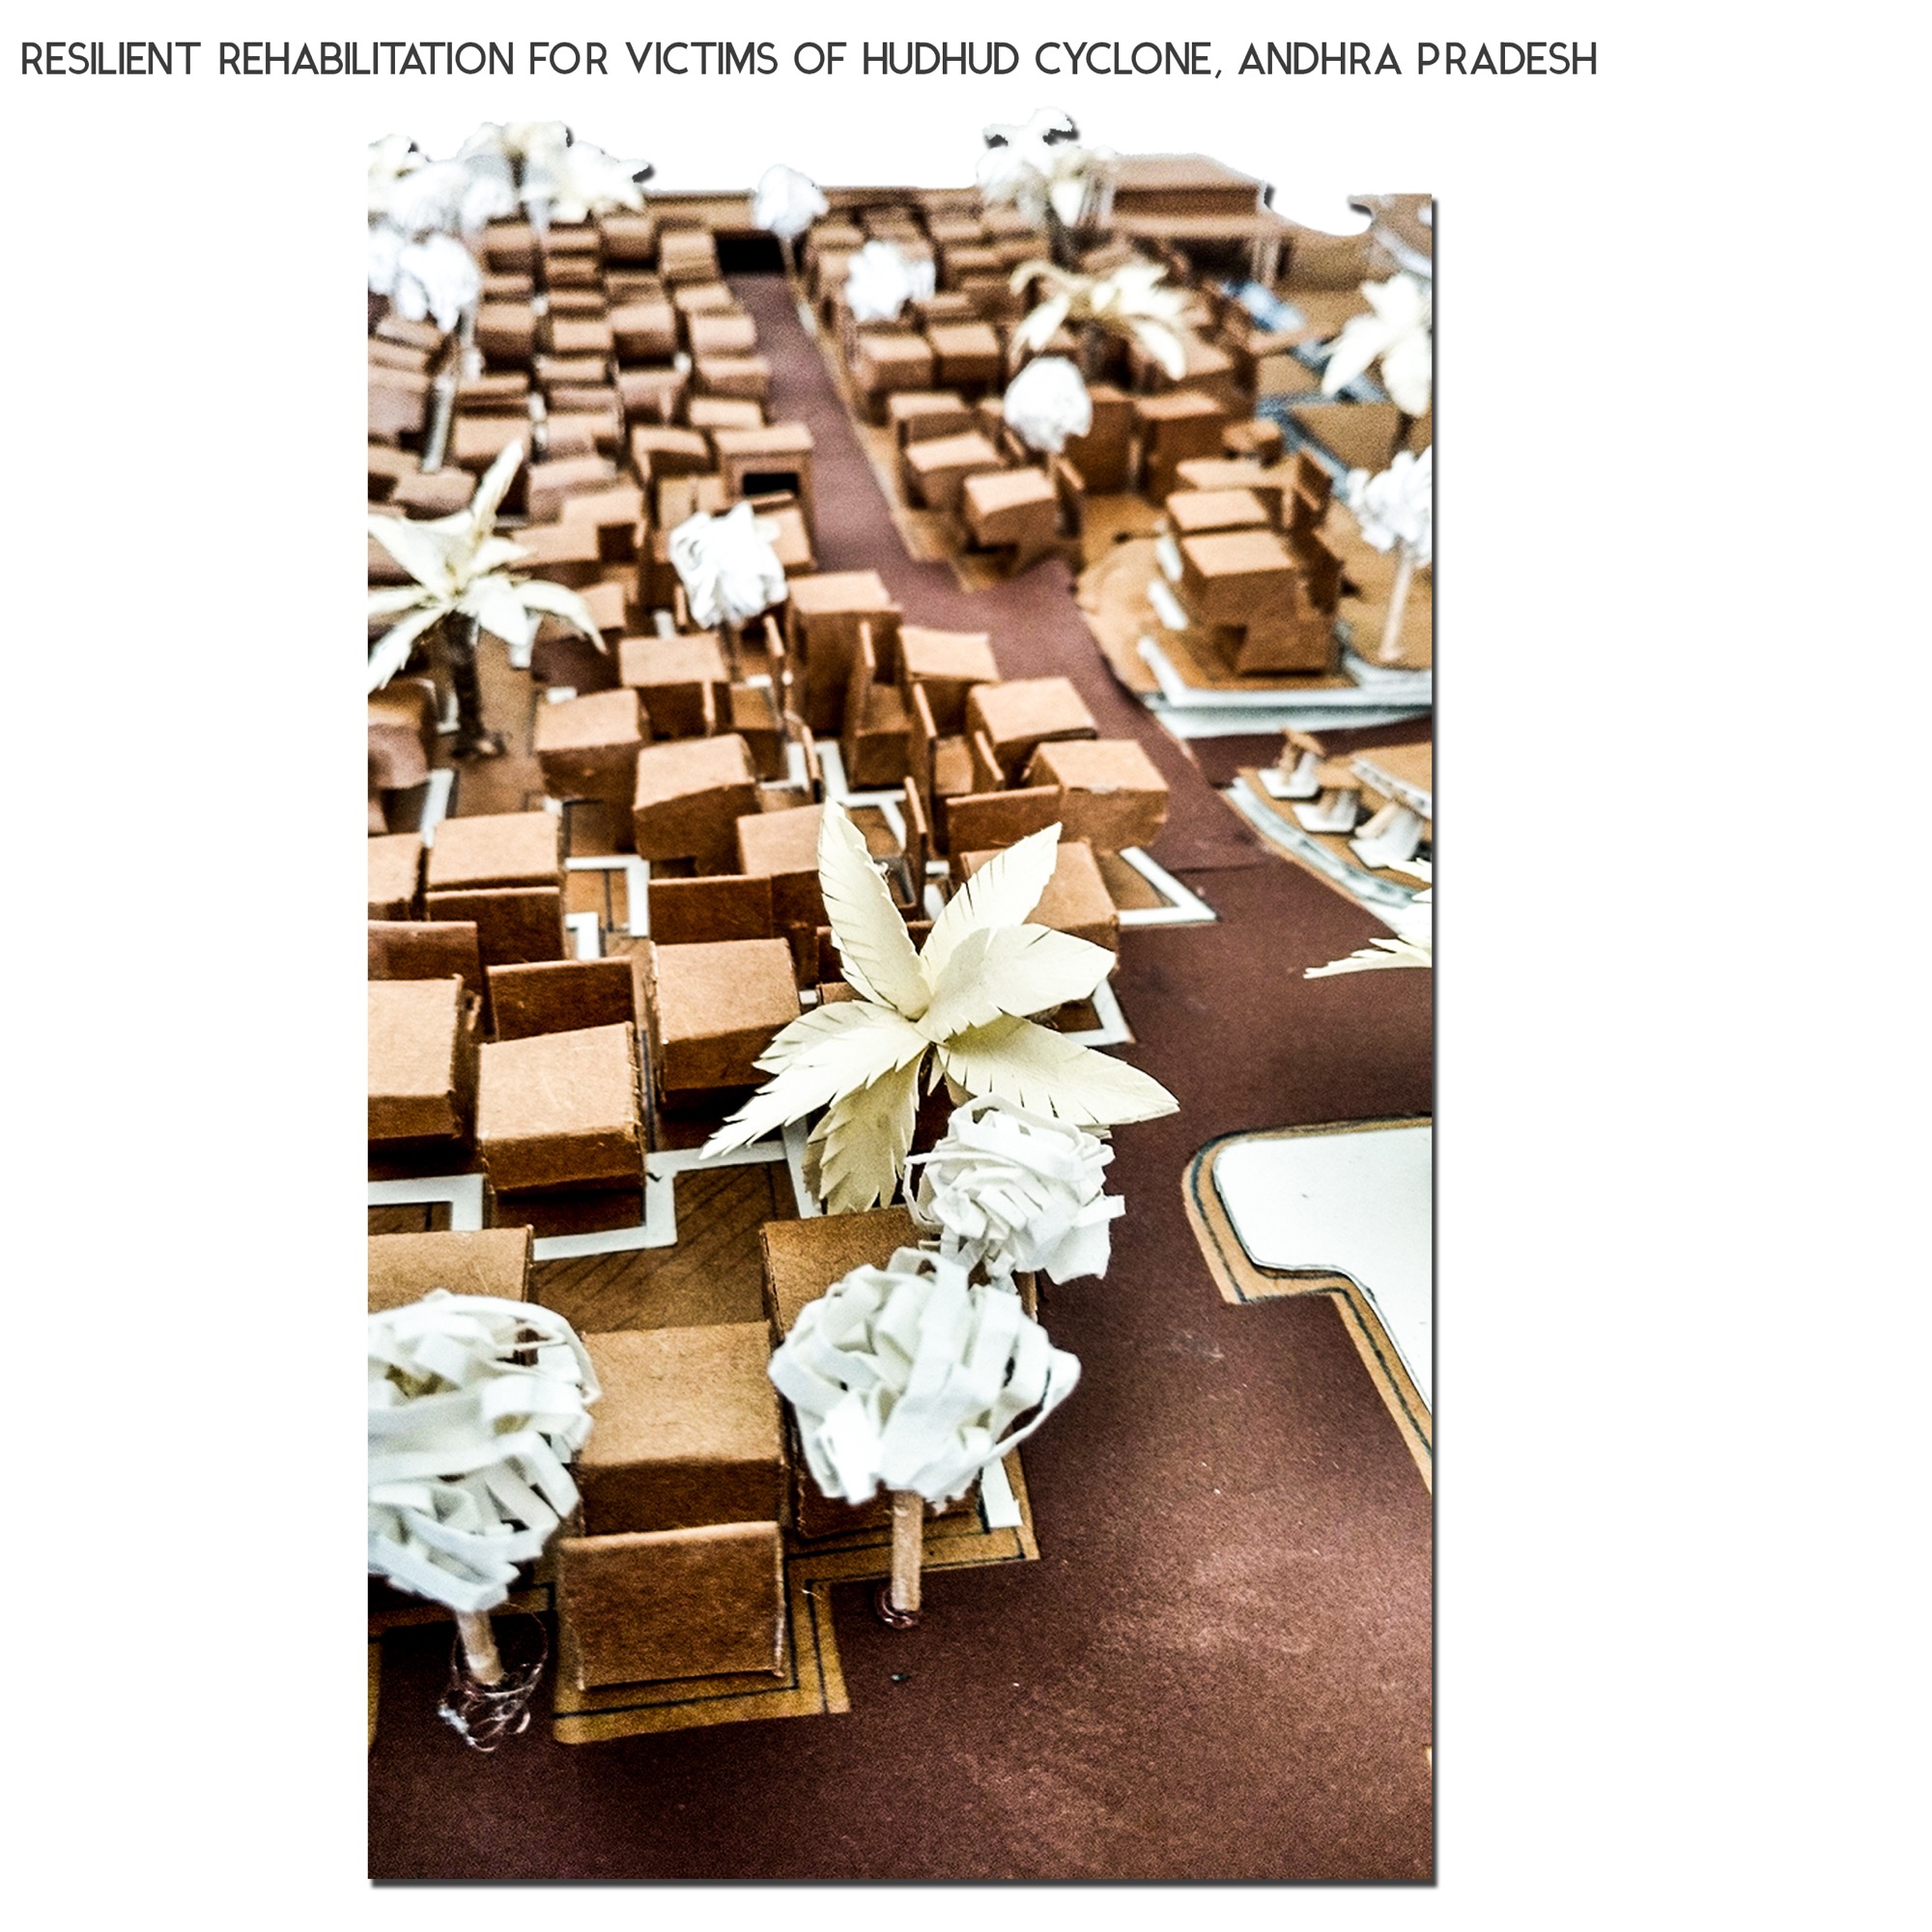 B.Arch Thesis: RESILIENT REHABILITATION FOR VICTIMS OF HUDHUD CYCLONE, ANDHRA PRADESH, by Sanand Telang 53